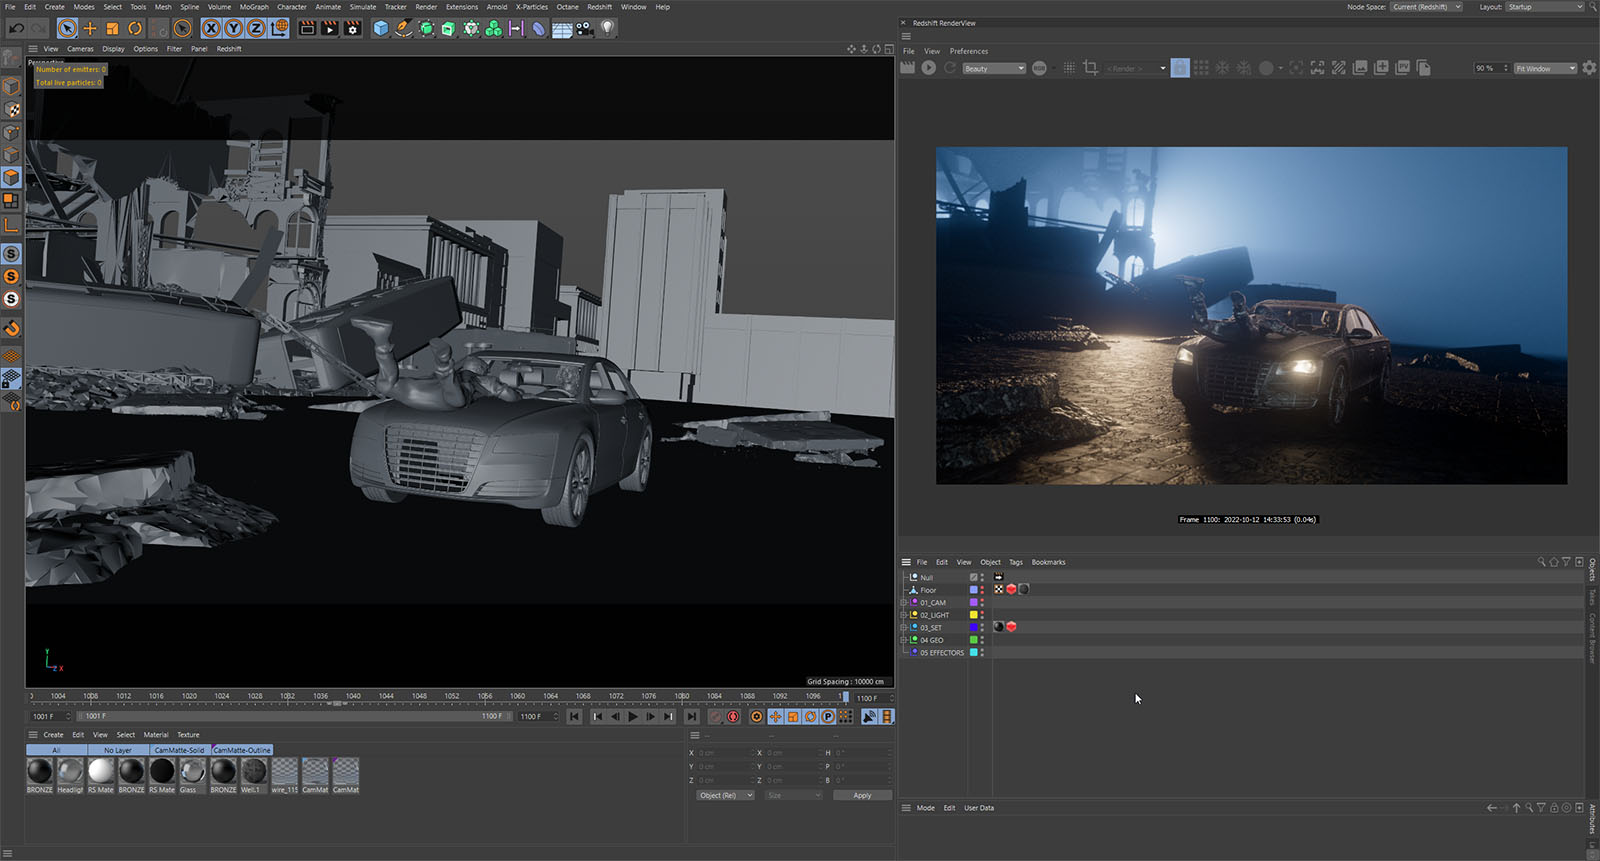 Lighting the scene and building camera moves in Cinema4D.